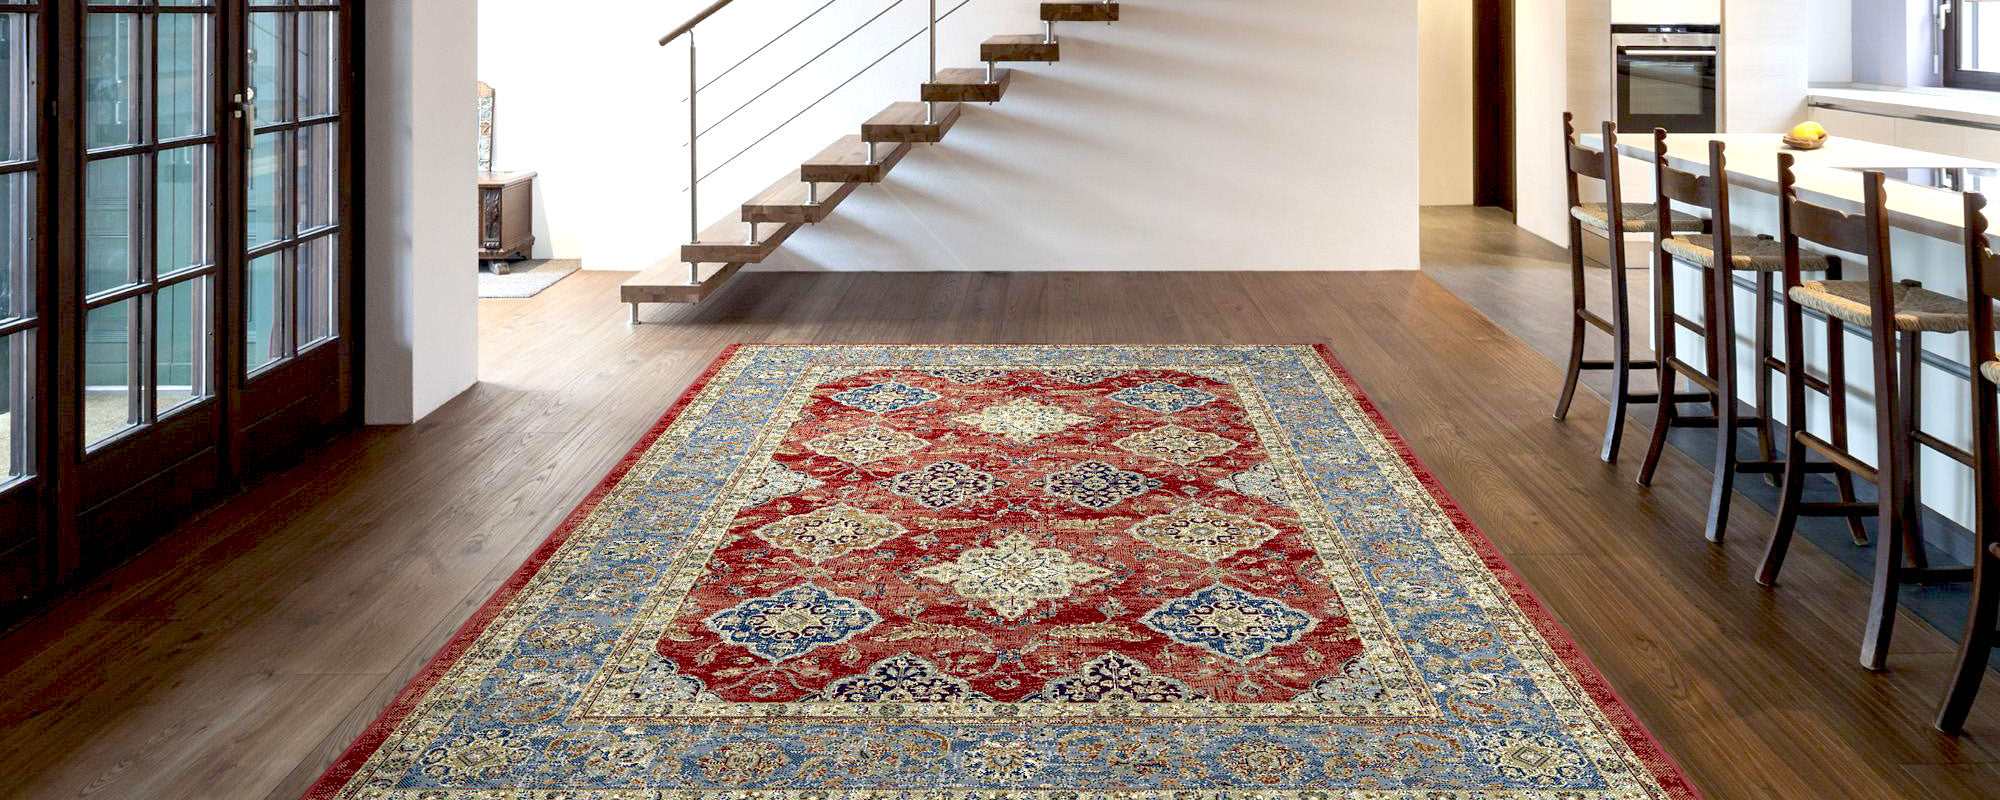 Rugs For Sale Online with Free UK Delivery at The Rug Seller